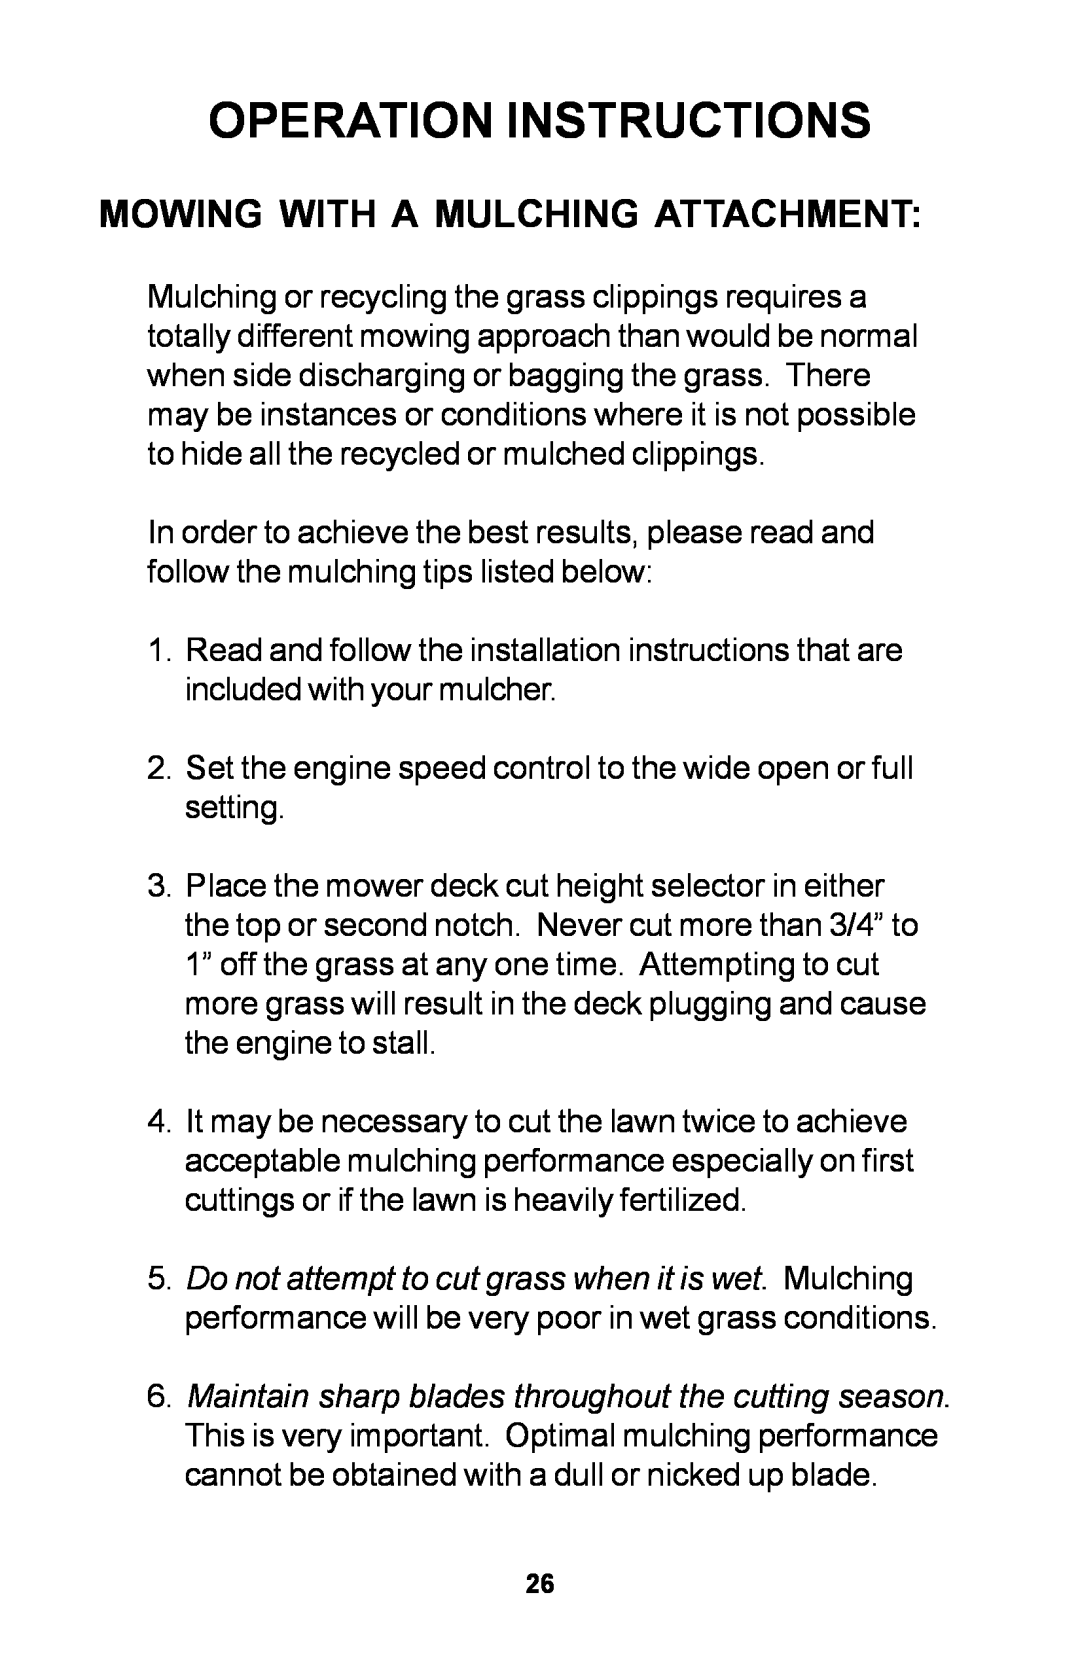 Dixon ZTR manual Mowing With A Mulching Attachment, Operation Instructions 